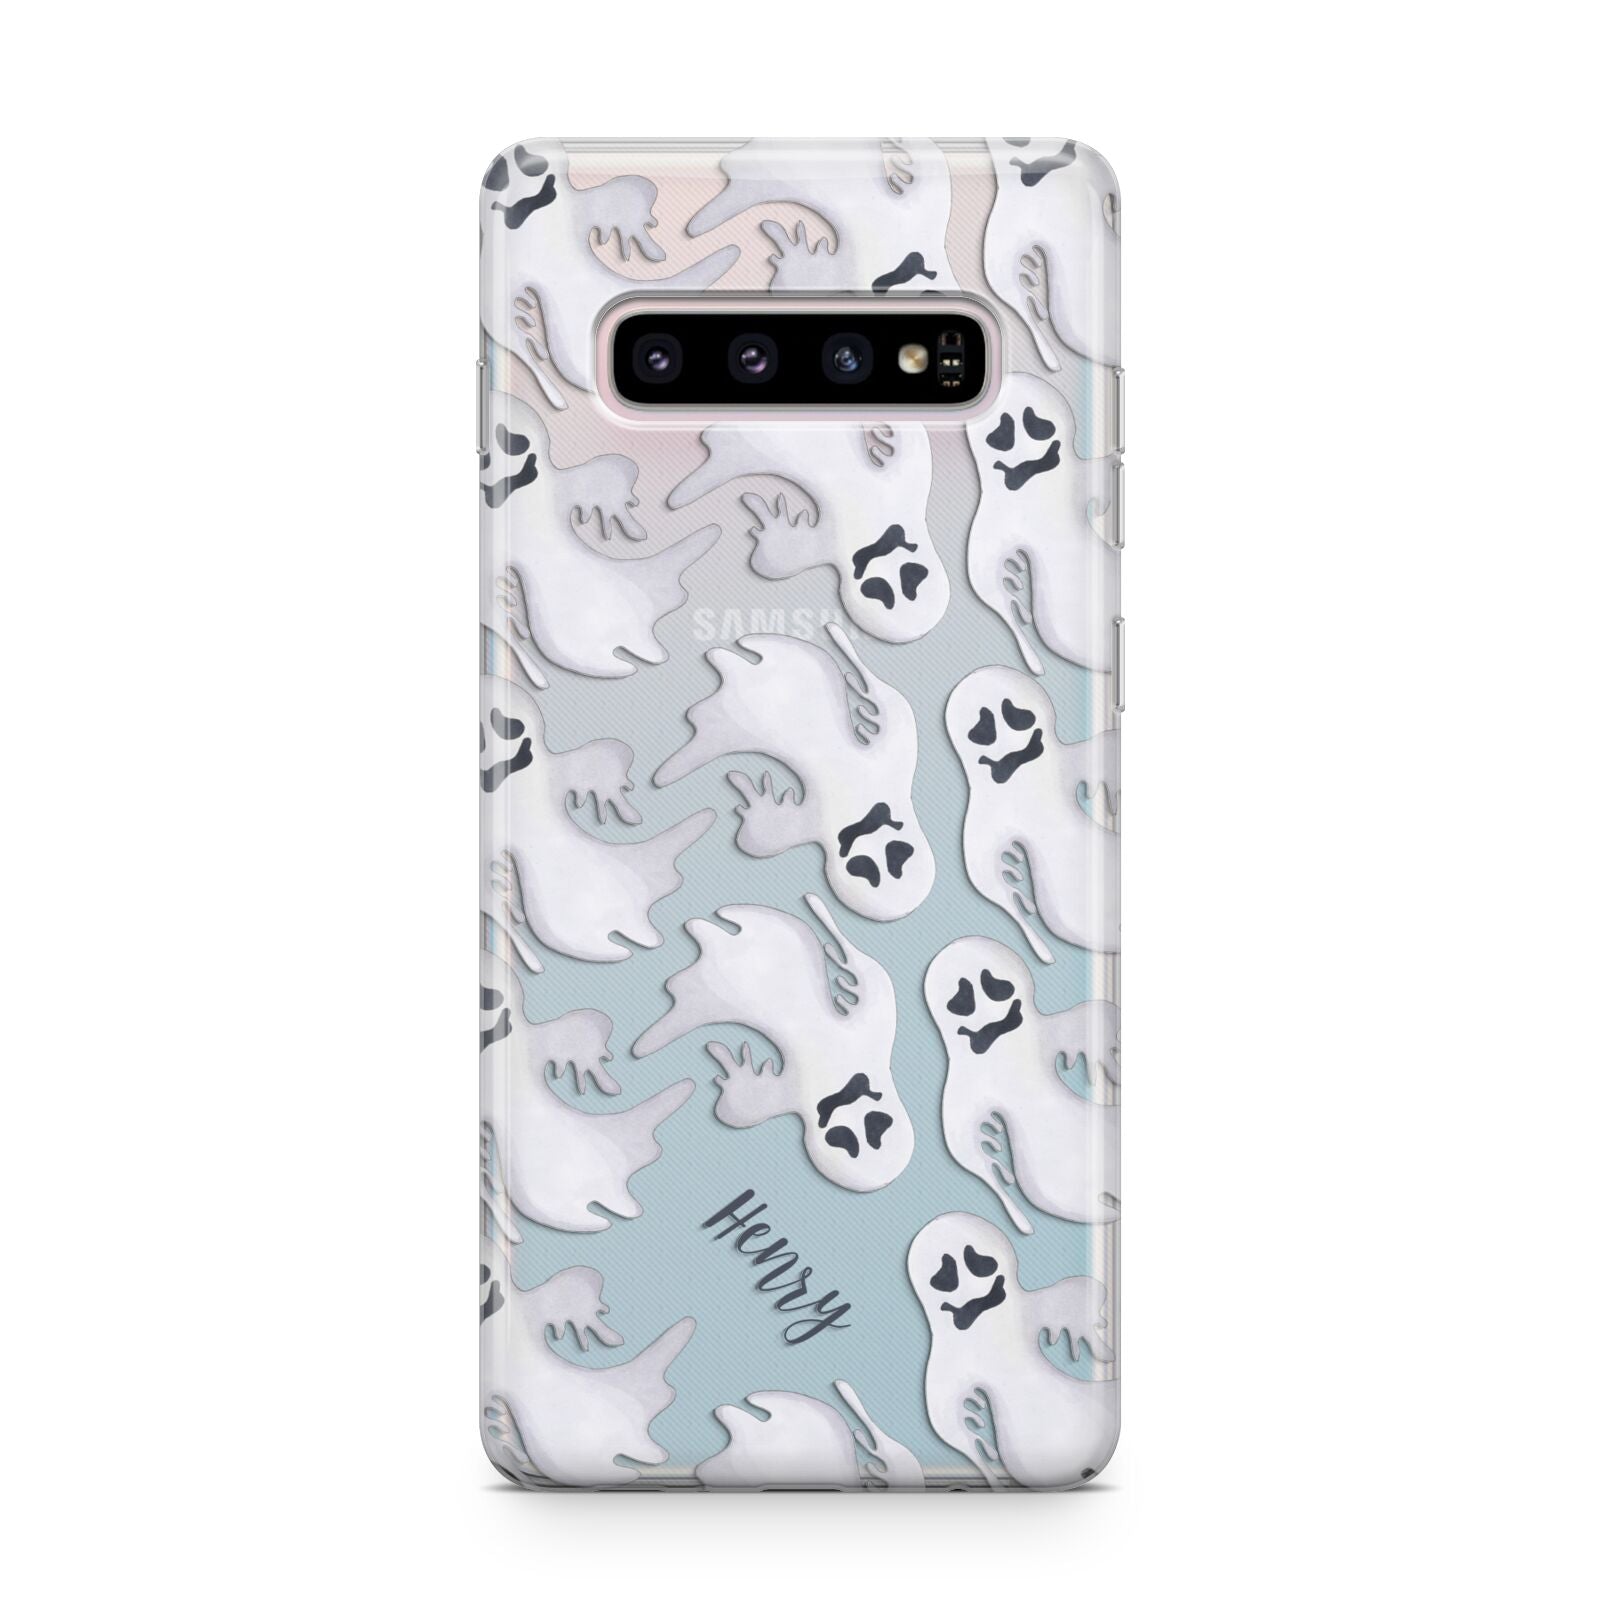 Floaty Ghosts Personalised Samsung Galaxy S10 Plus Case